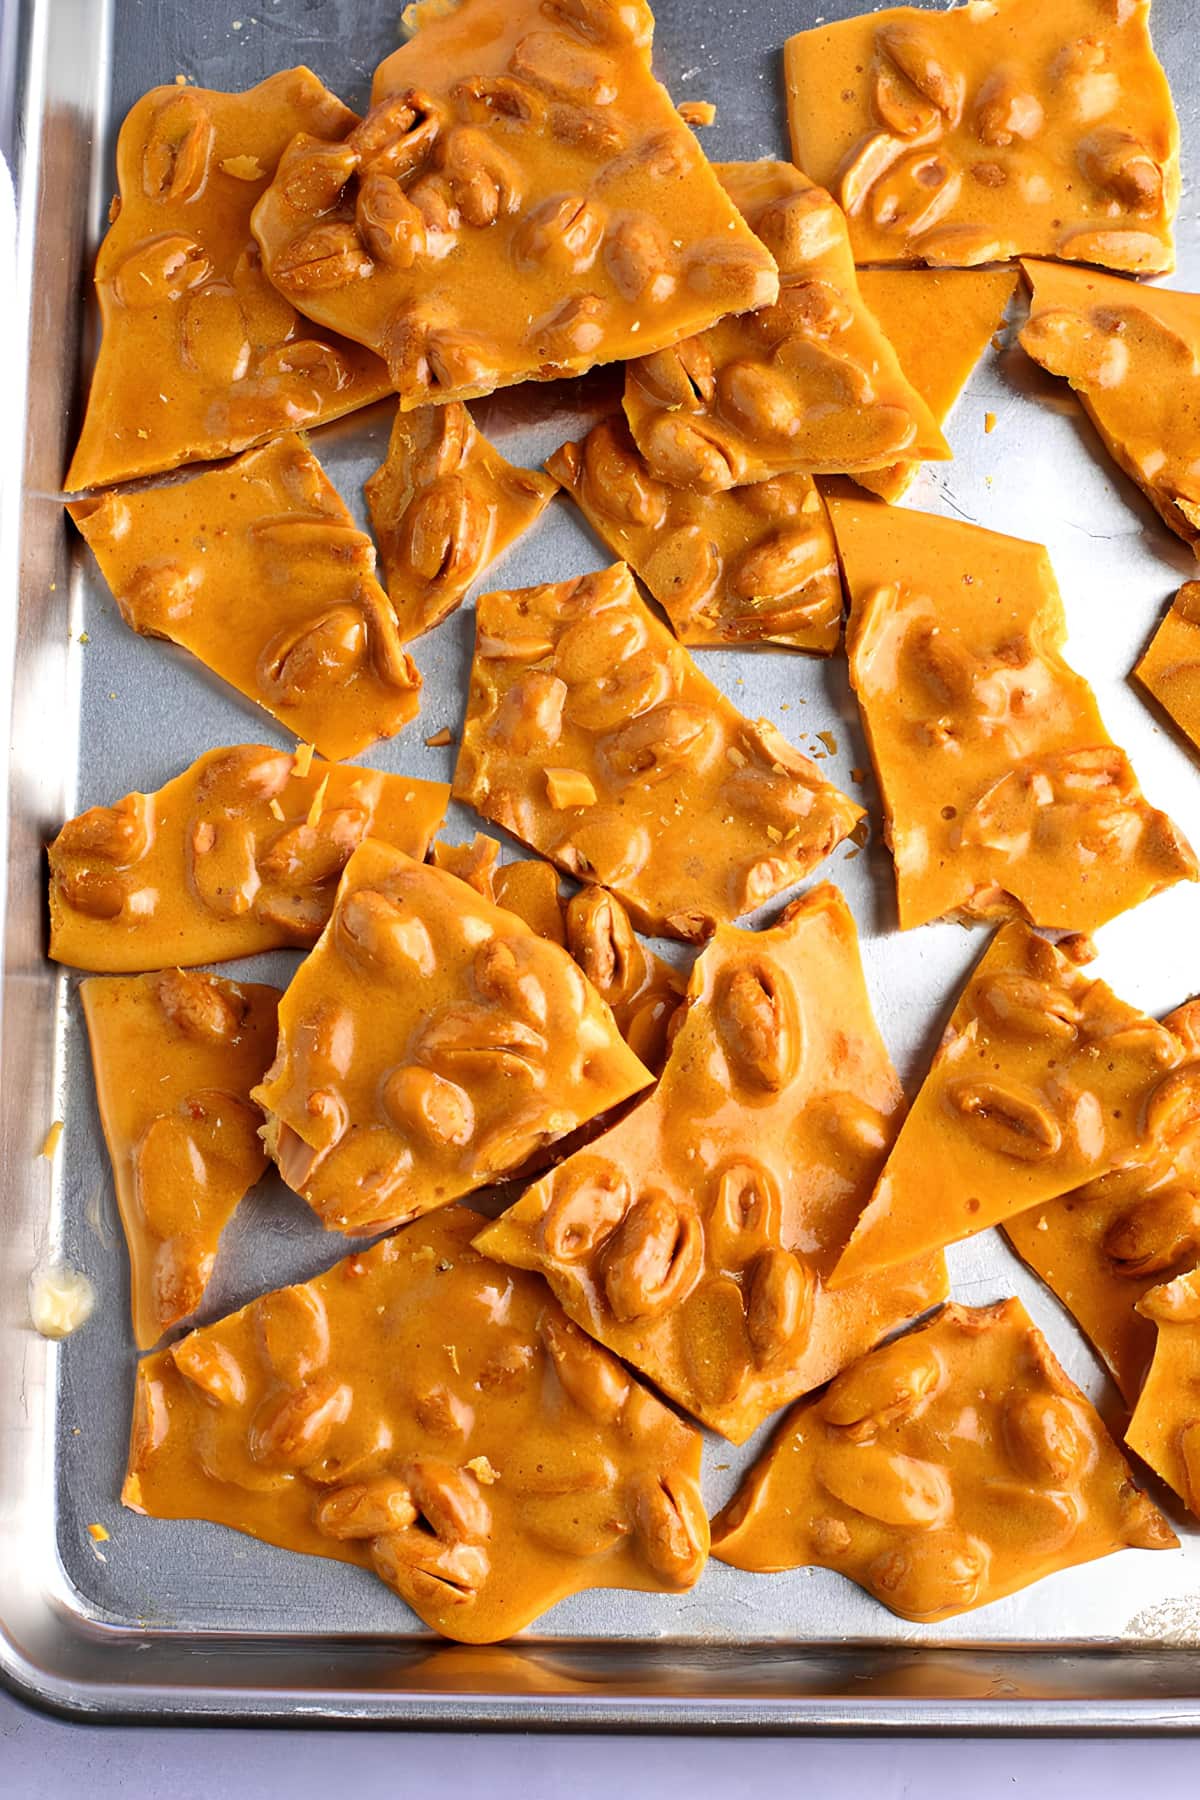 Chewy and Crunchy Homemade Microwave Peanut Brittle